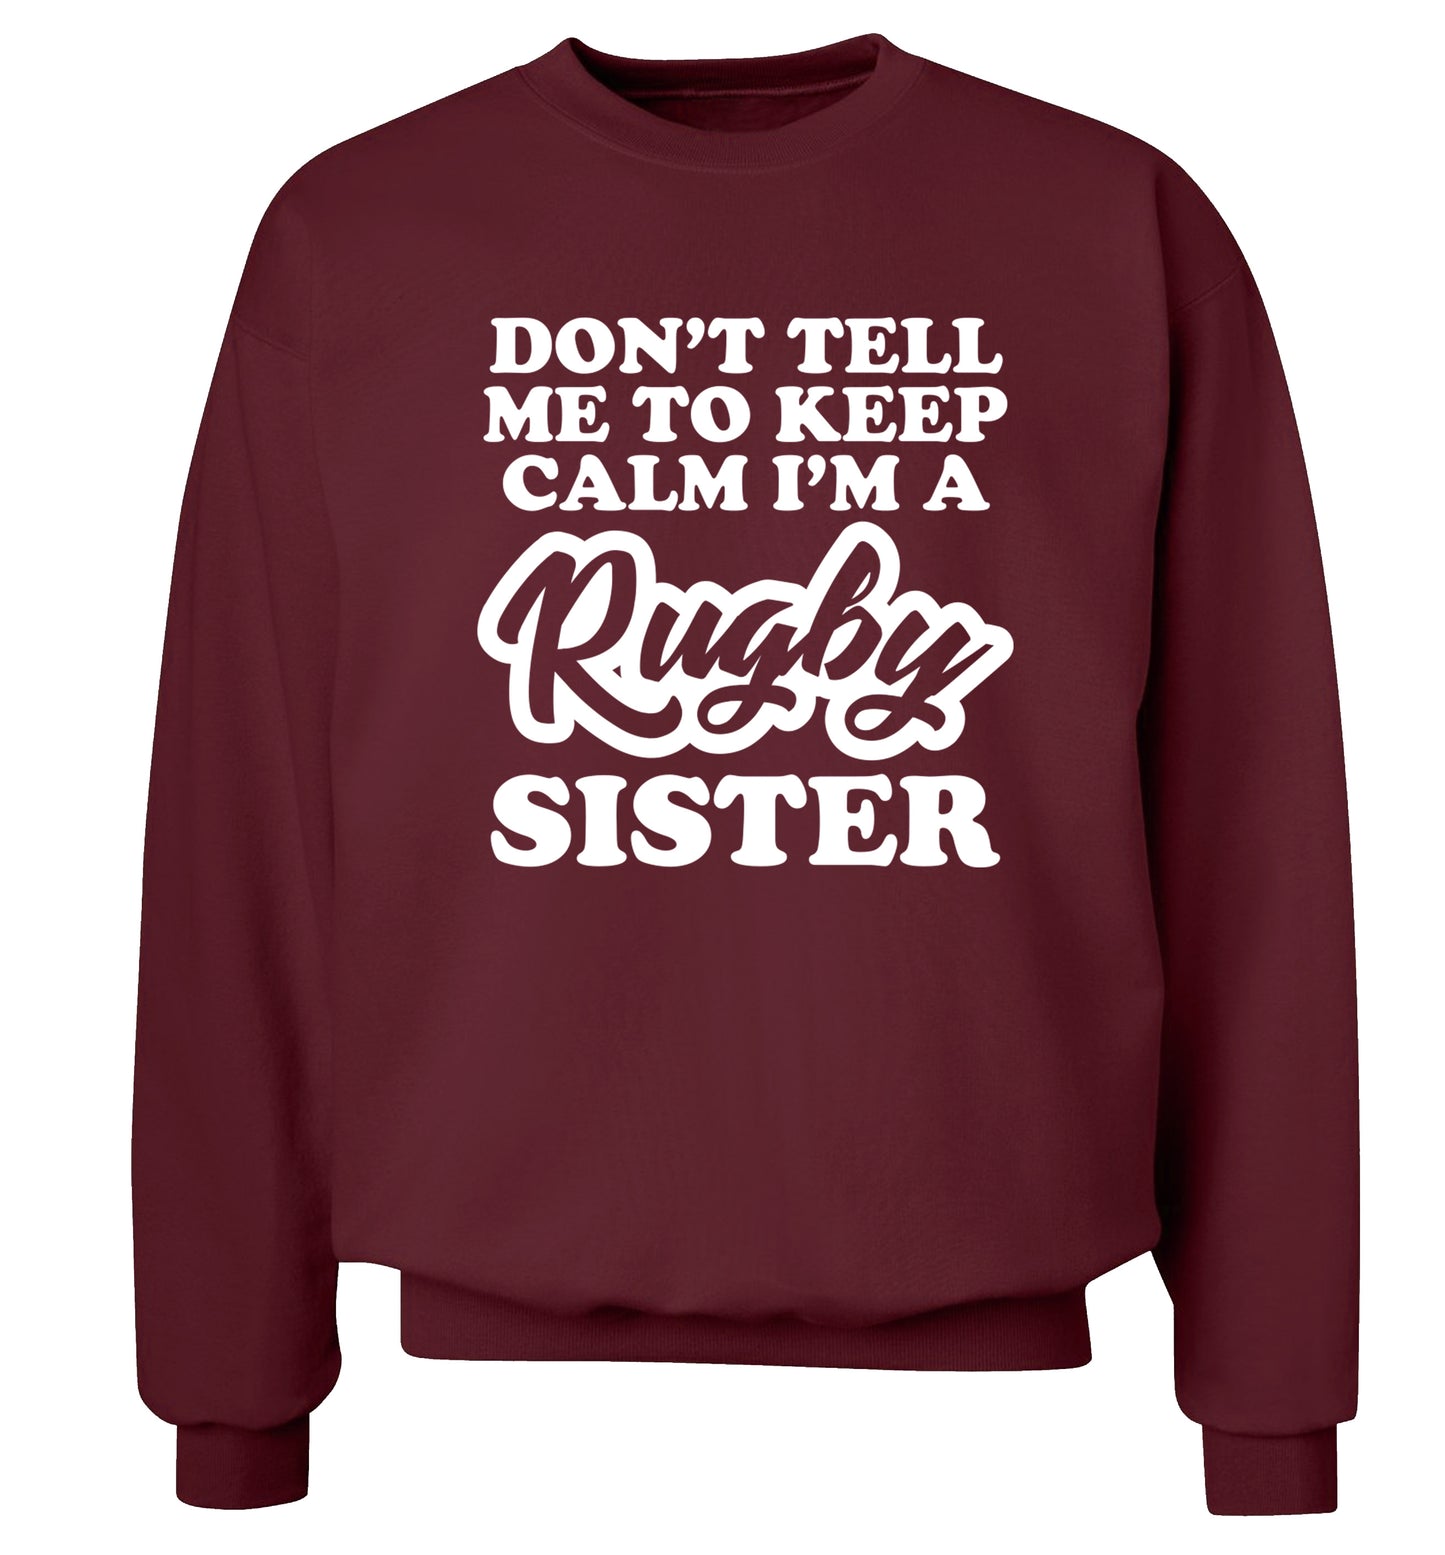 Don't tell me keep calm I'm a rugby sister Adult's unisex maroon Sweater 2XL